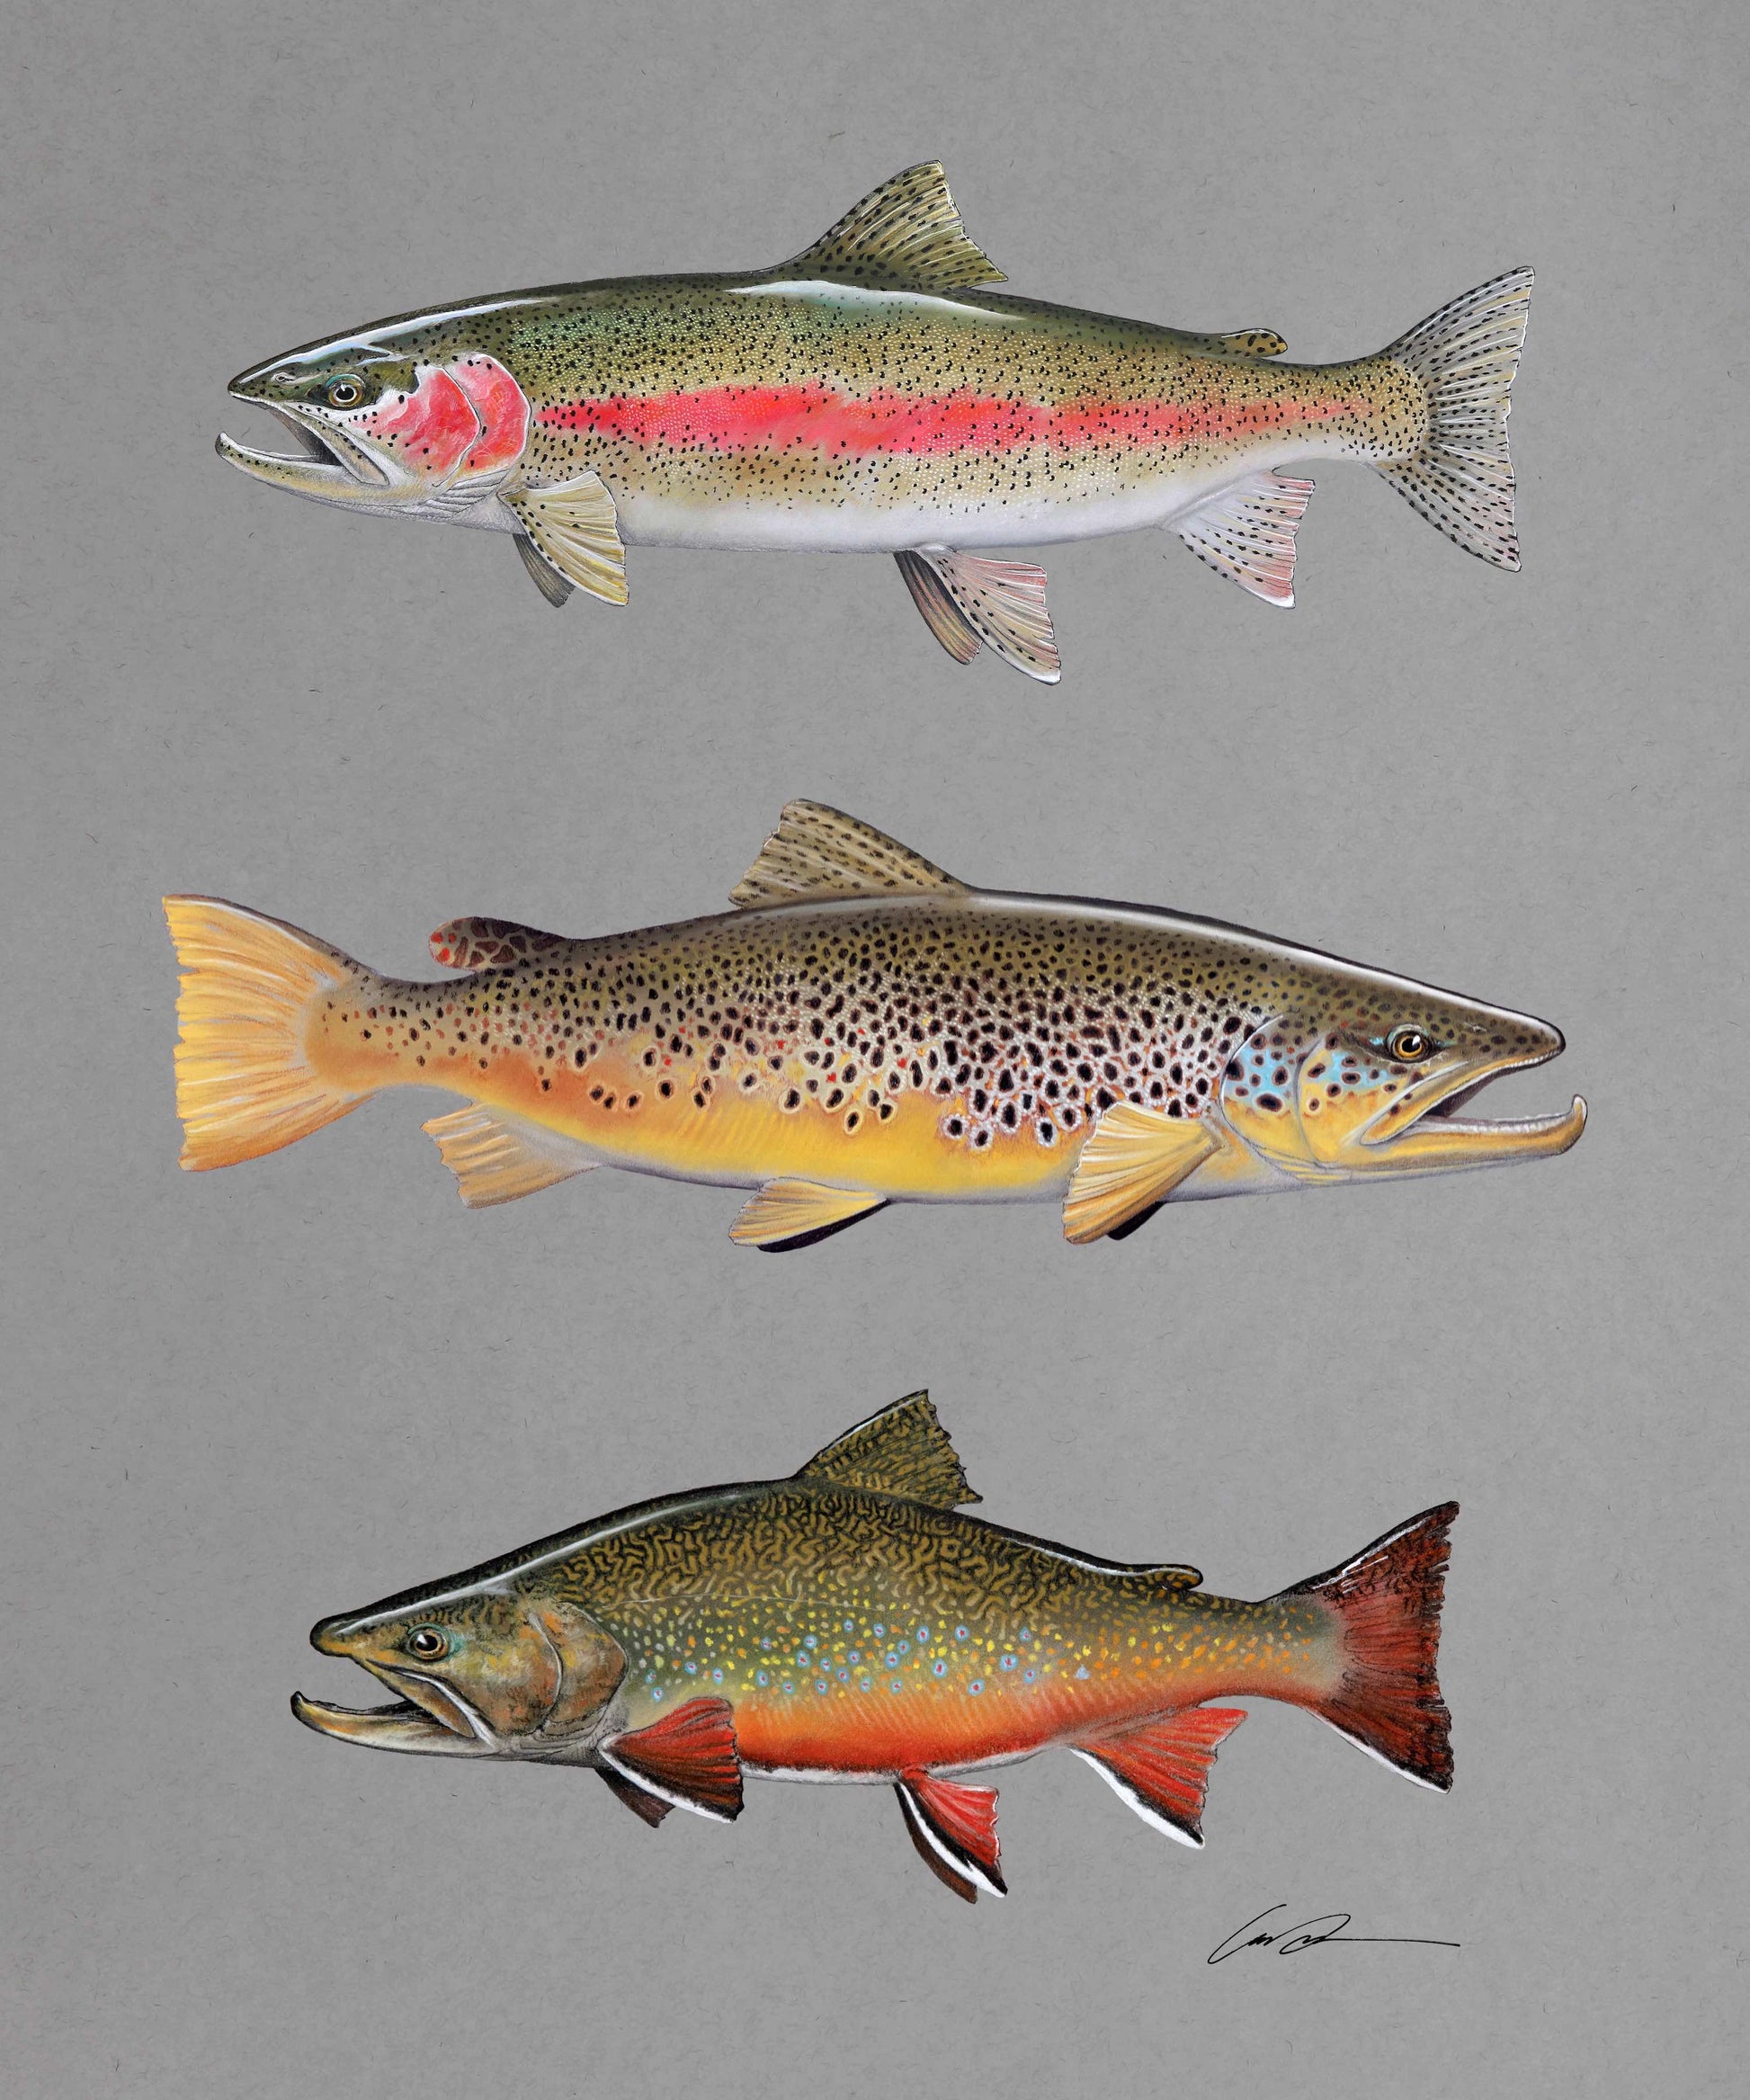 Pastel of a Rainbow Trout at the top, a Brown Trout in the middle, and a Brook Trout at the bottom